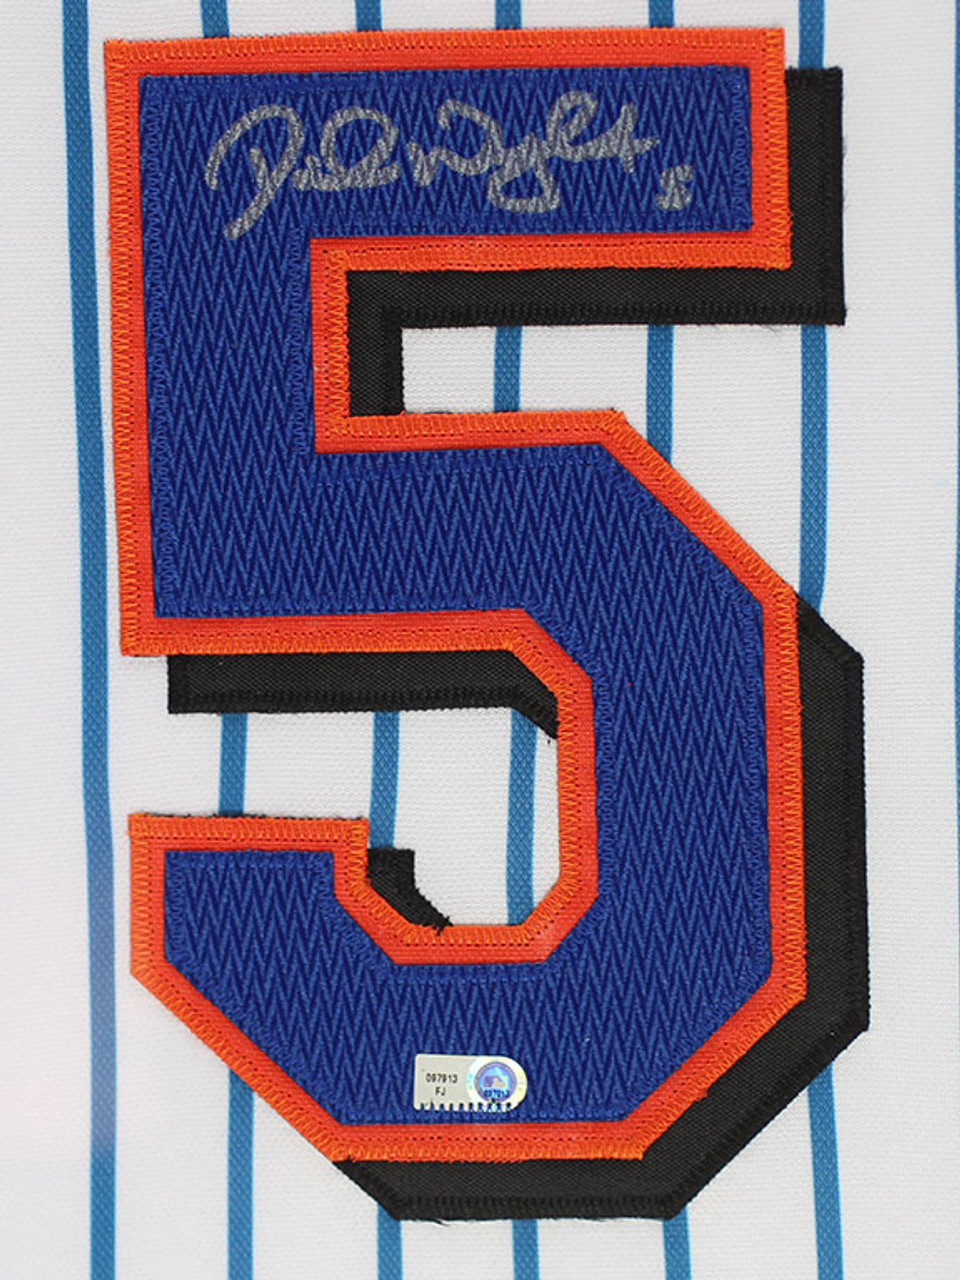 David Wright Autographed and Framed Pinstriped Mets Jersey